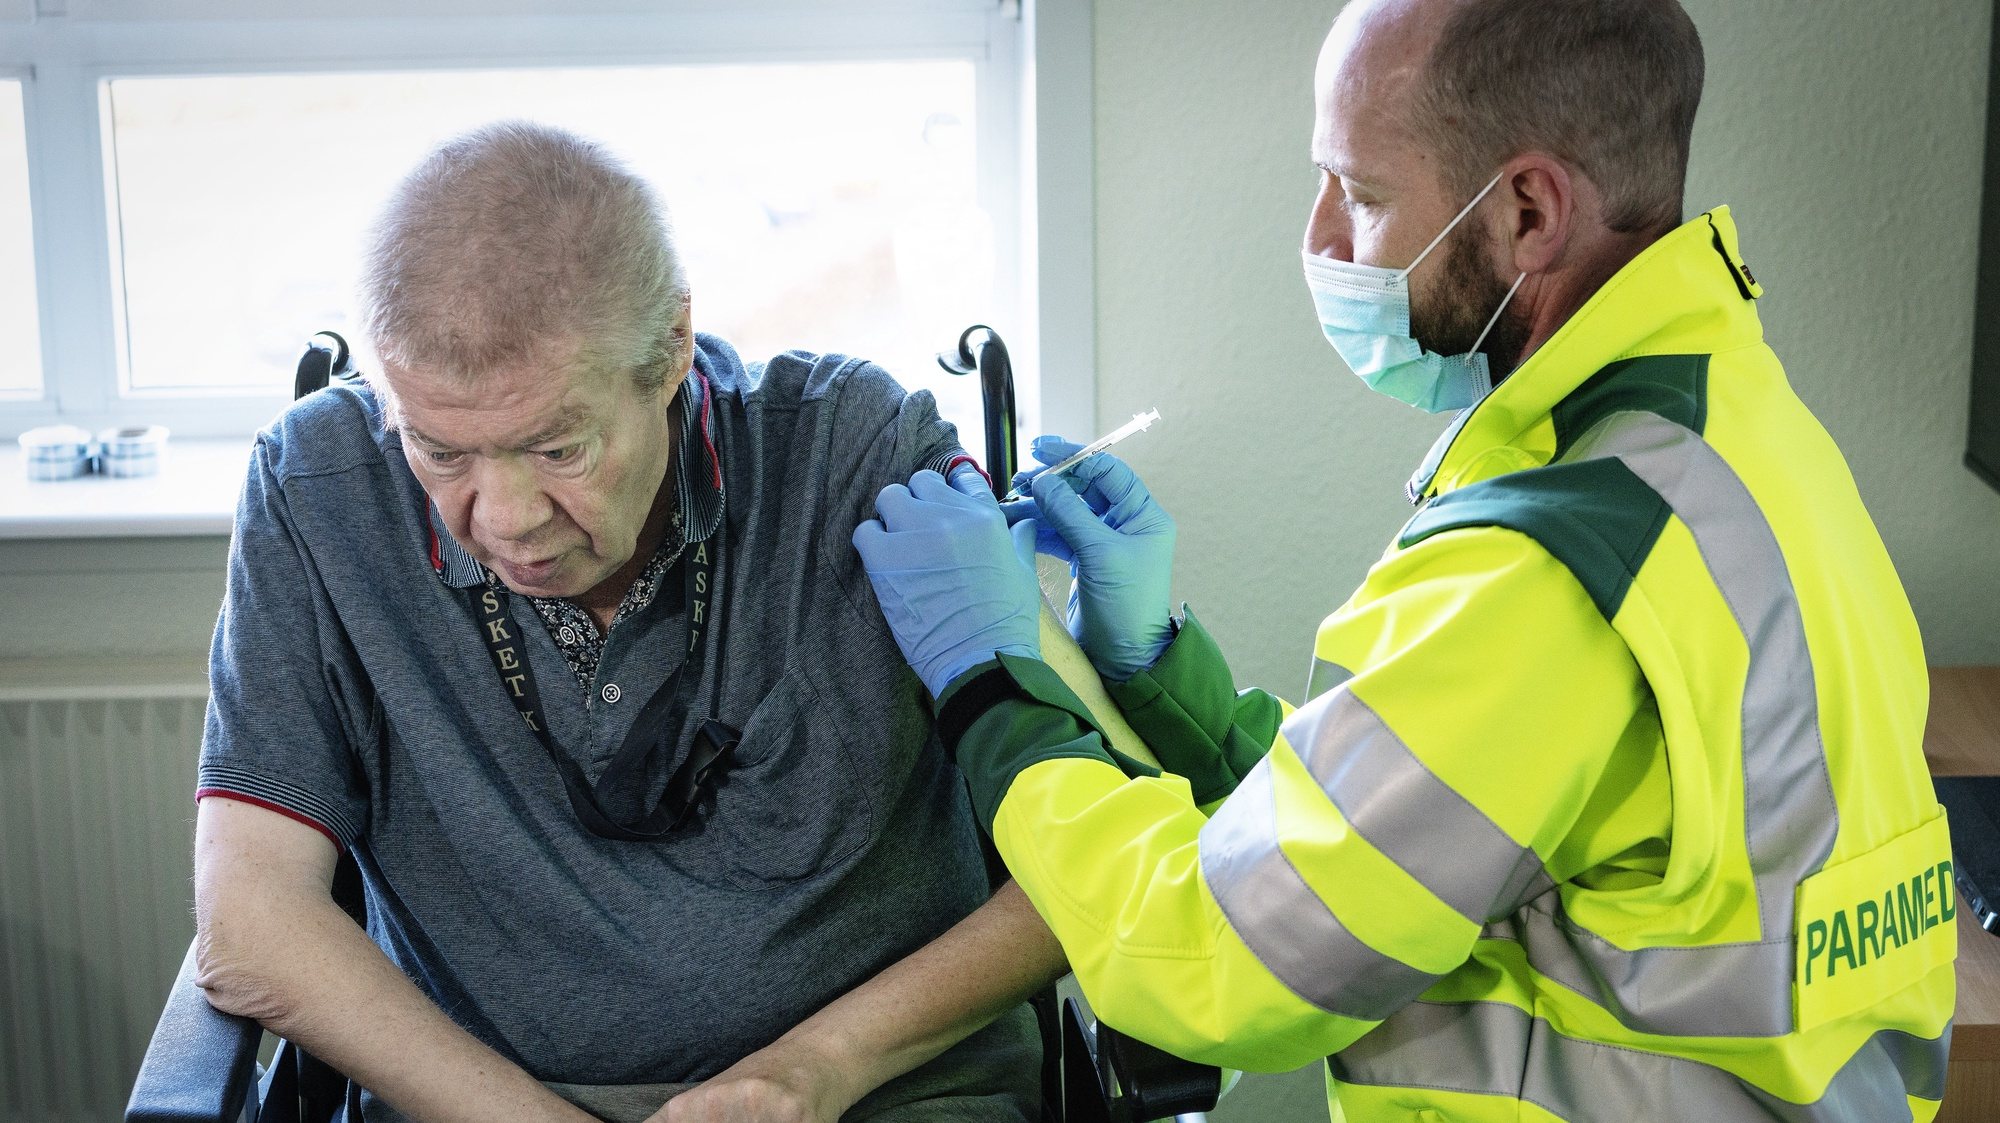 epa09053200 A 67-year-old Aage Steen Jensen, who is a kidney patient, is vaccinated in his own home in Aalborg, Denmark, 05 March 2021. Elderly, over 65, who cannot be transported to a coronavirus vaccination site, receive both practical help and personal care. On 05 March, the first seven persons from Northern Jutland will receive the first vaccinations against Covid-19 in their own homes. Paramedics from the North Jutland Region will perform the vaccinations.  EPA/BO AMSTRUP  DENMARK OUT